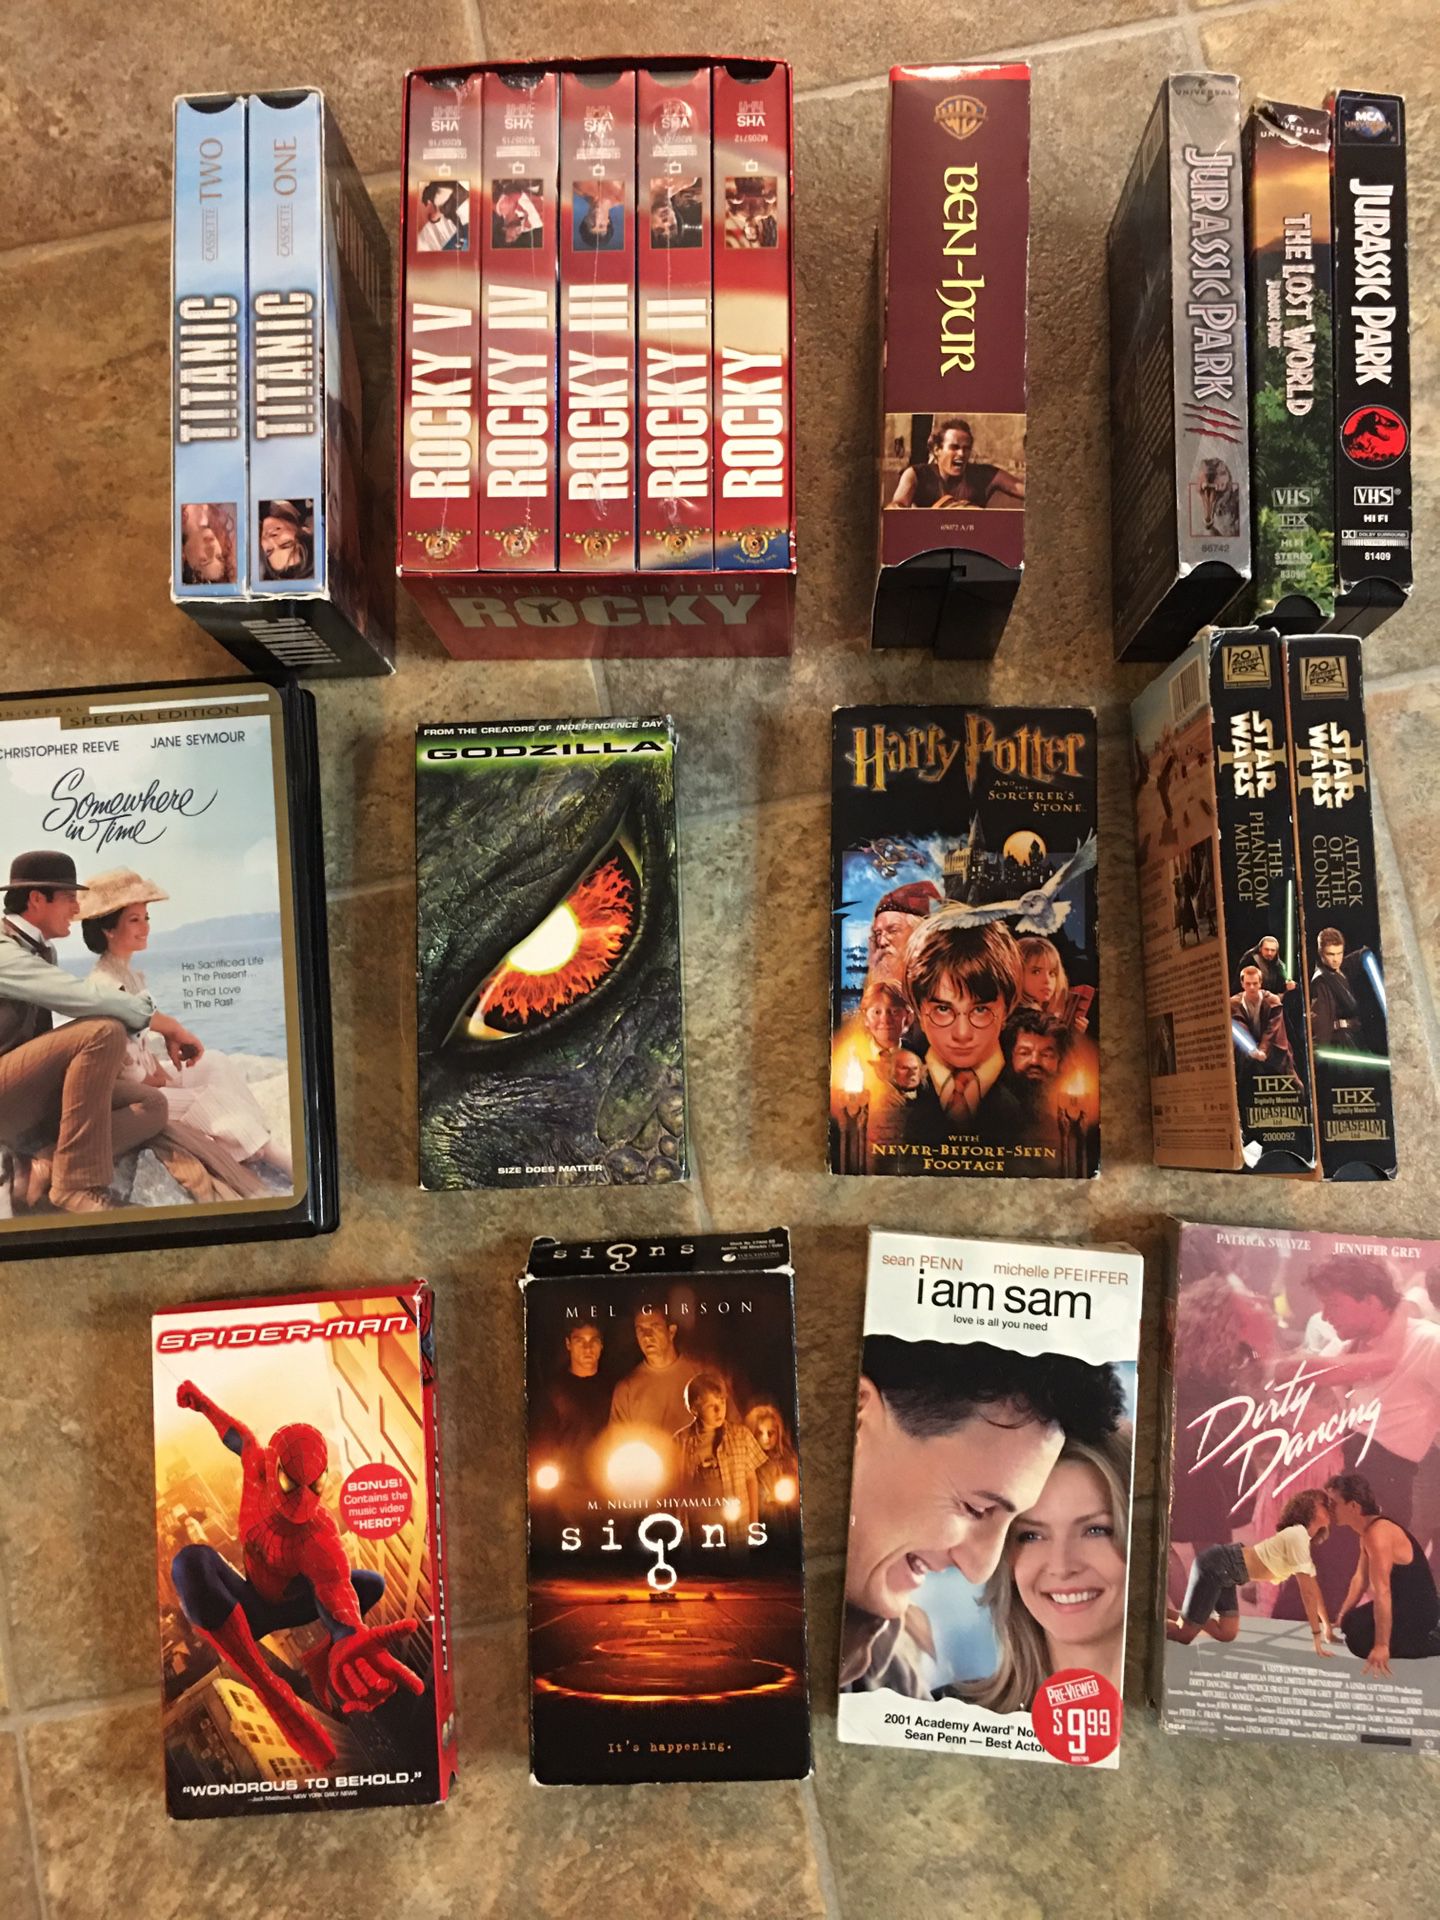 19 classic movies on tape $10 or best offer takes all